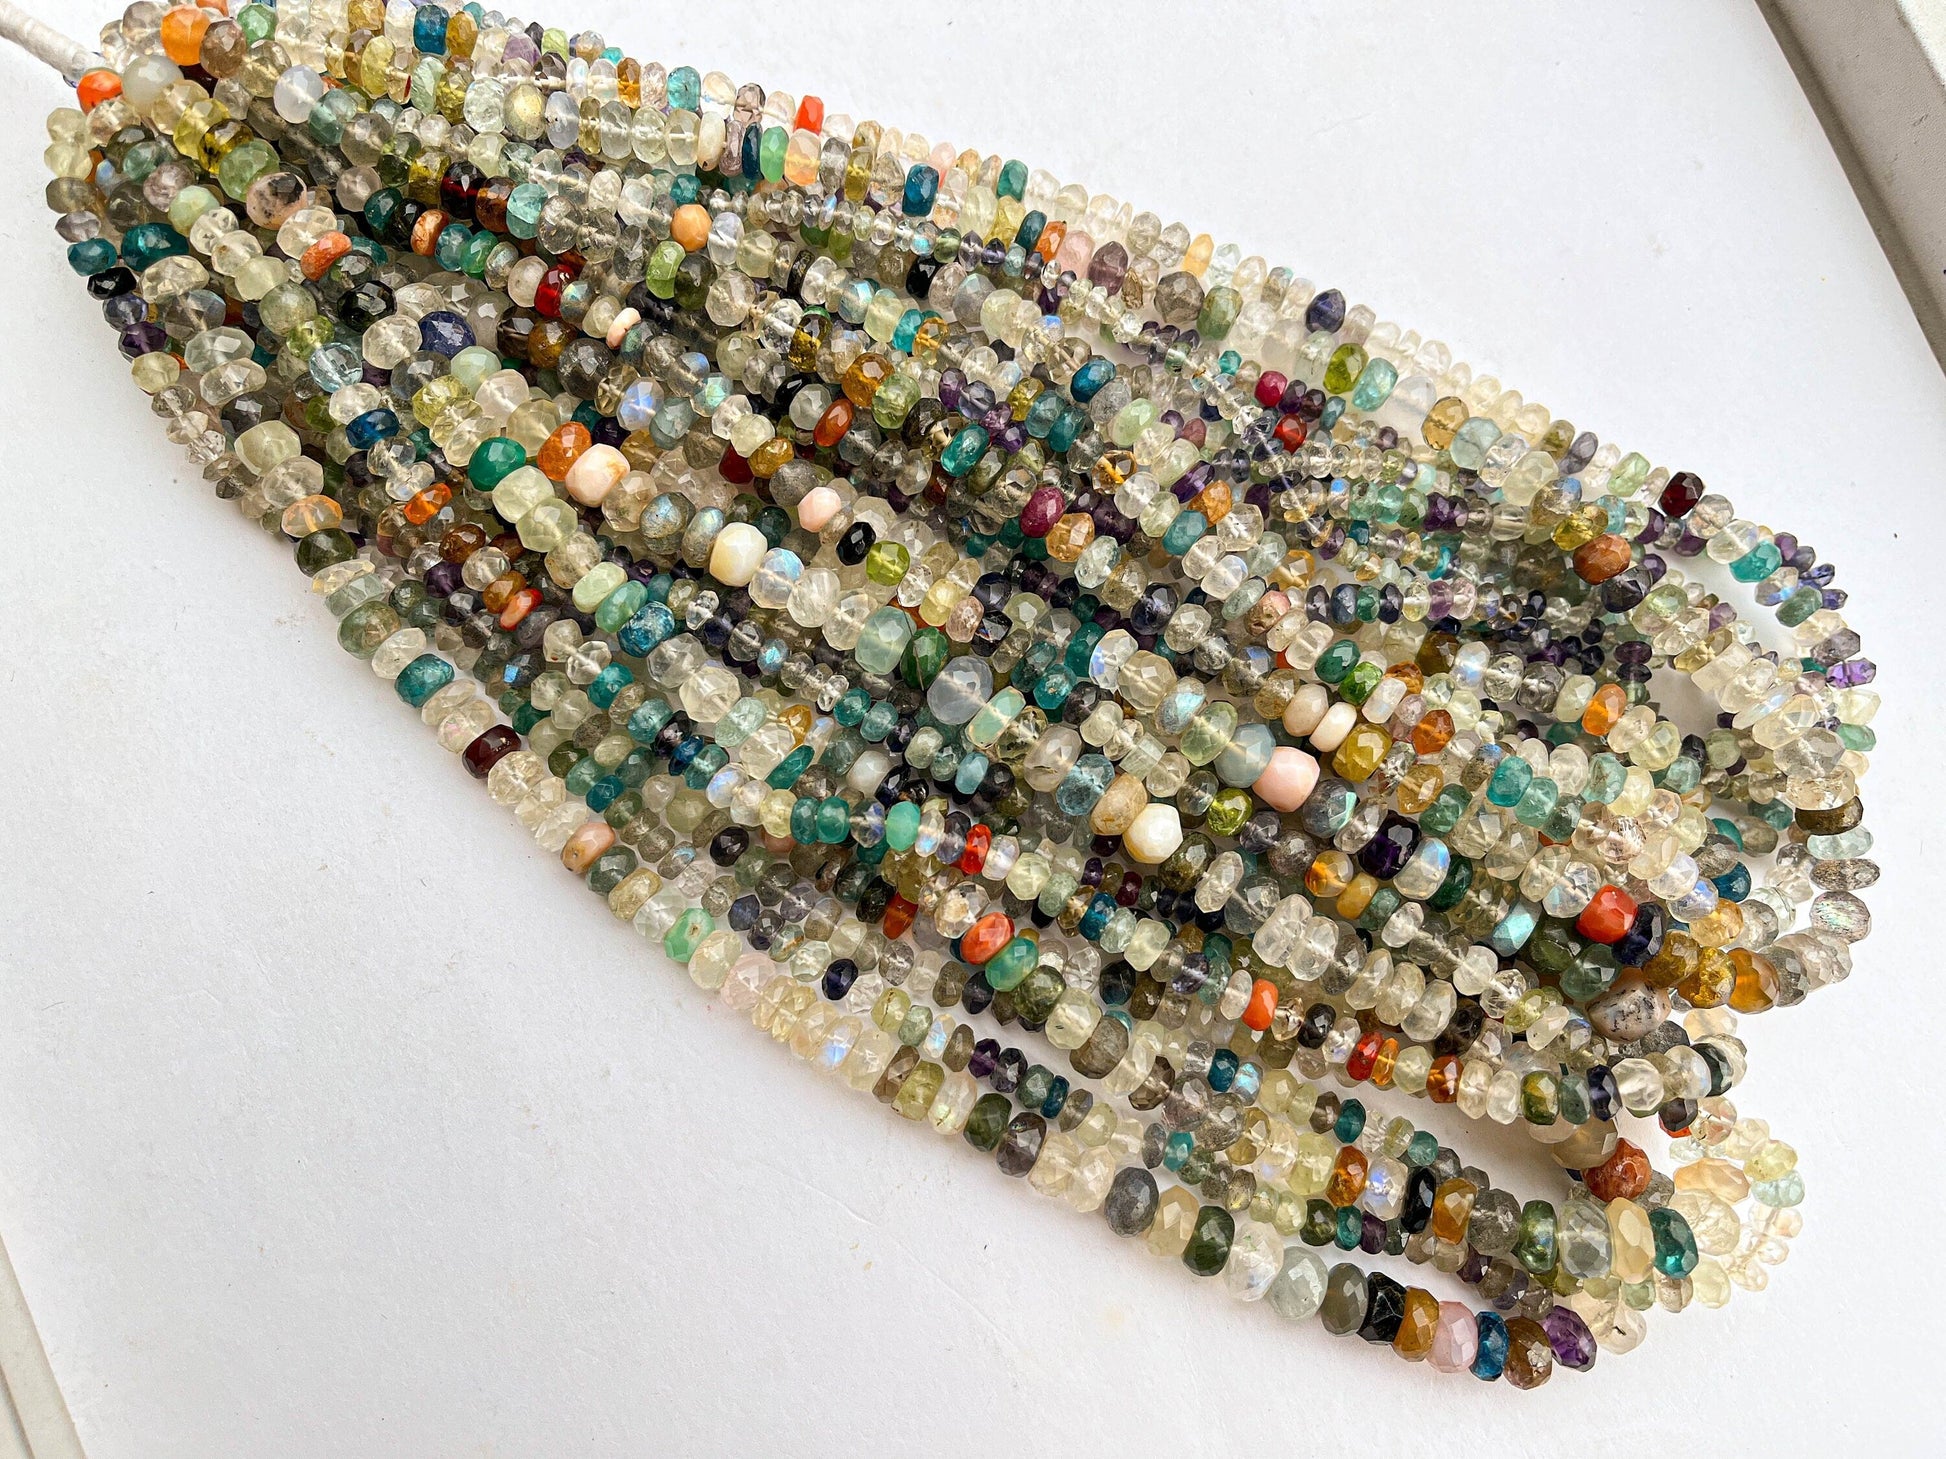 16 Inch Multi Gemstone Faceted Rondelle Shape Beads, Multi Gemstone Faceted Beads, 16 Inch String, Mix Semi Precious Gemstone Beads Beadsforyourjewelry